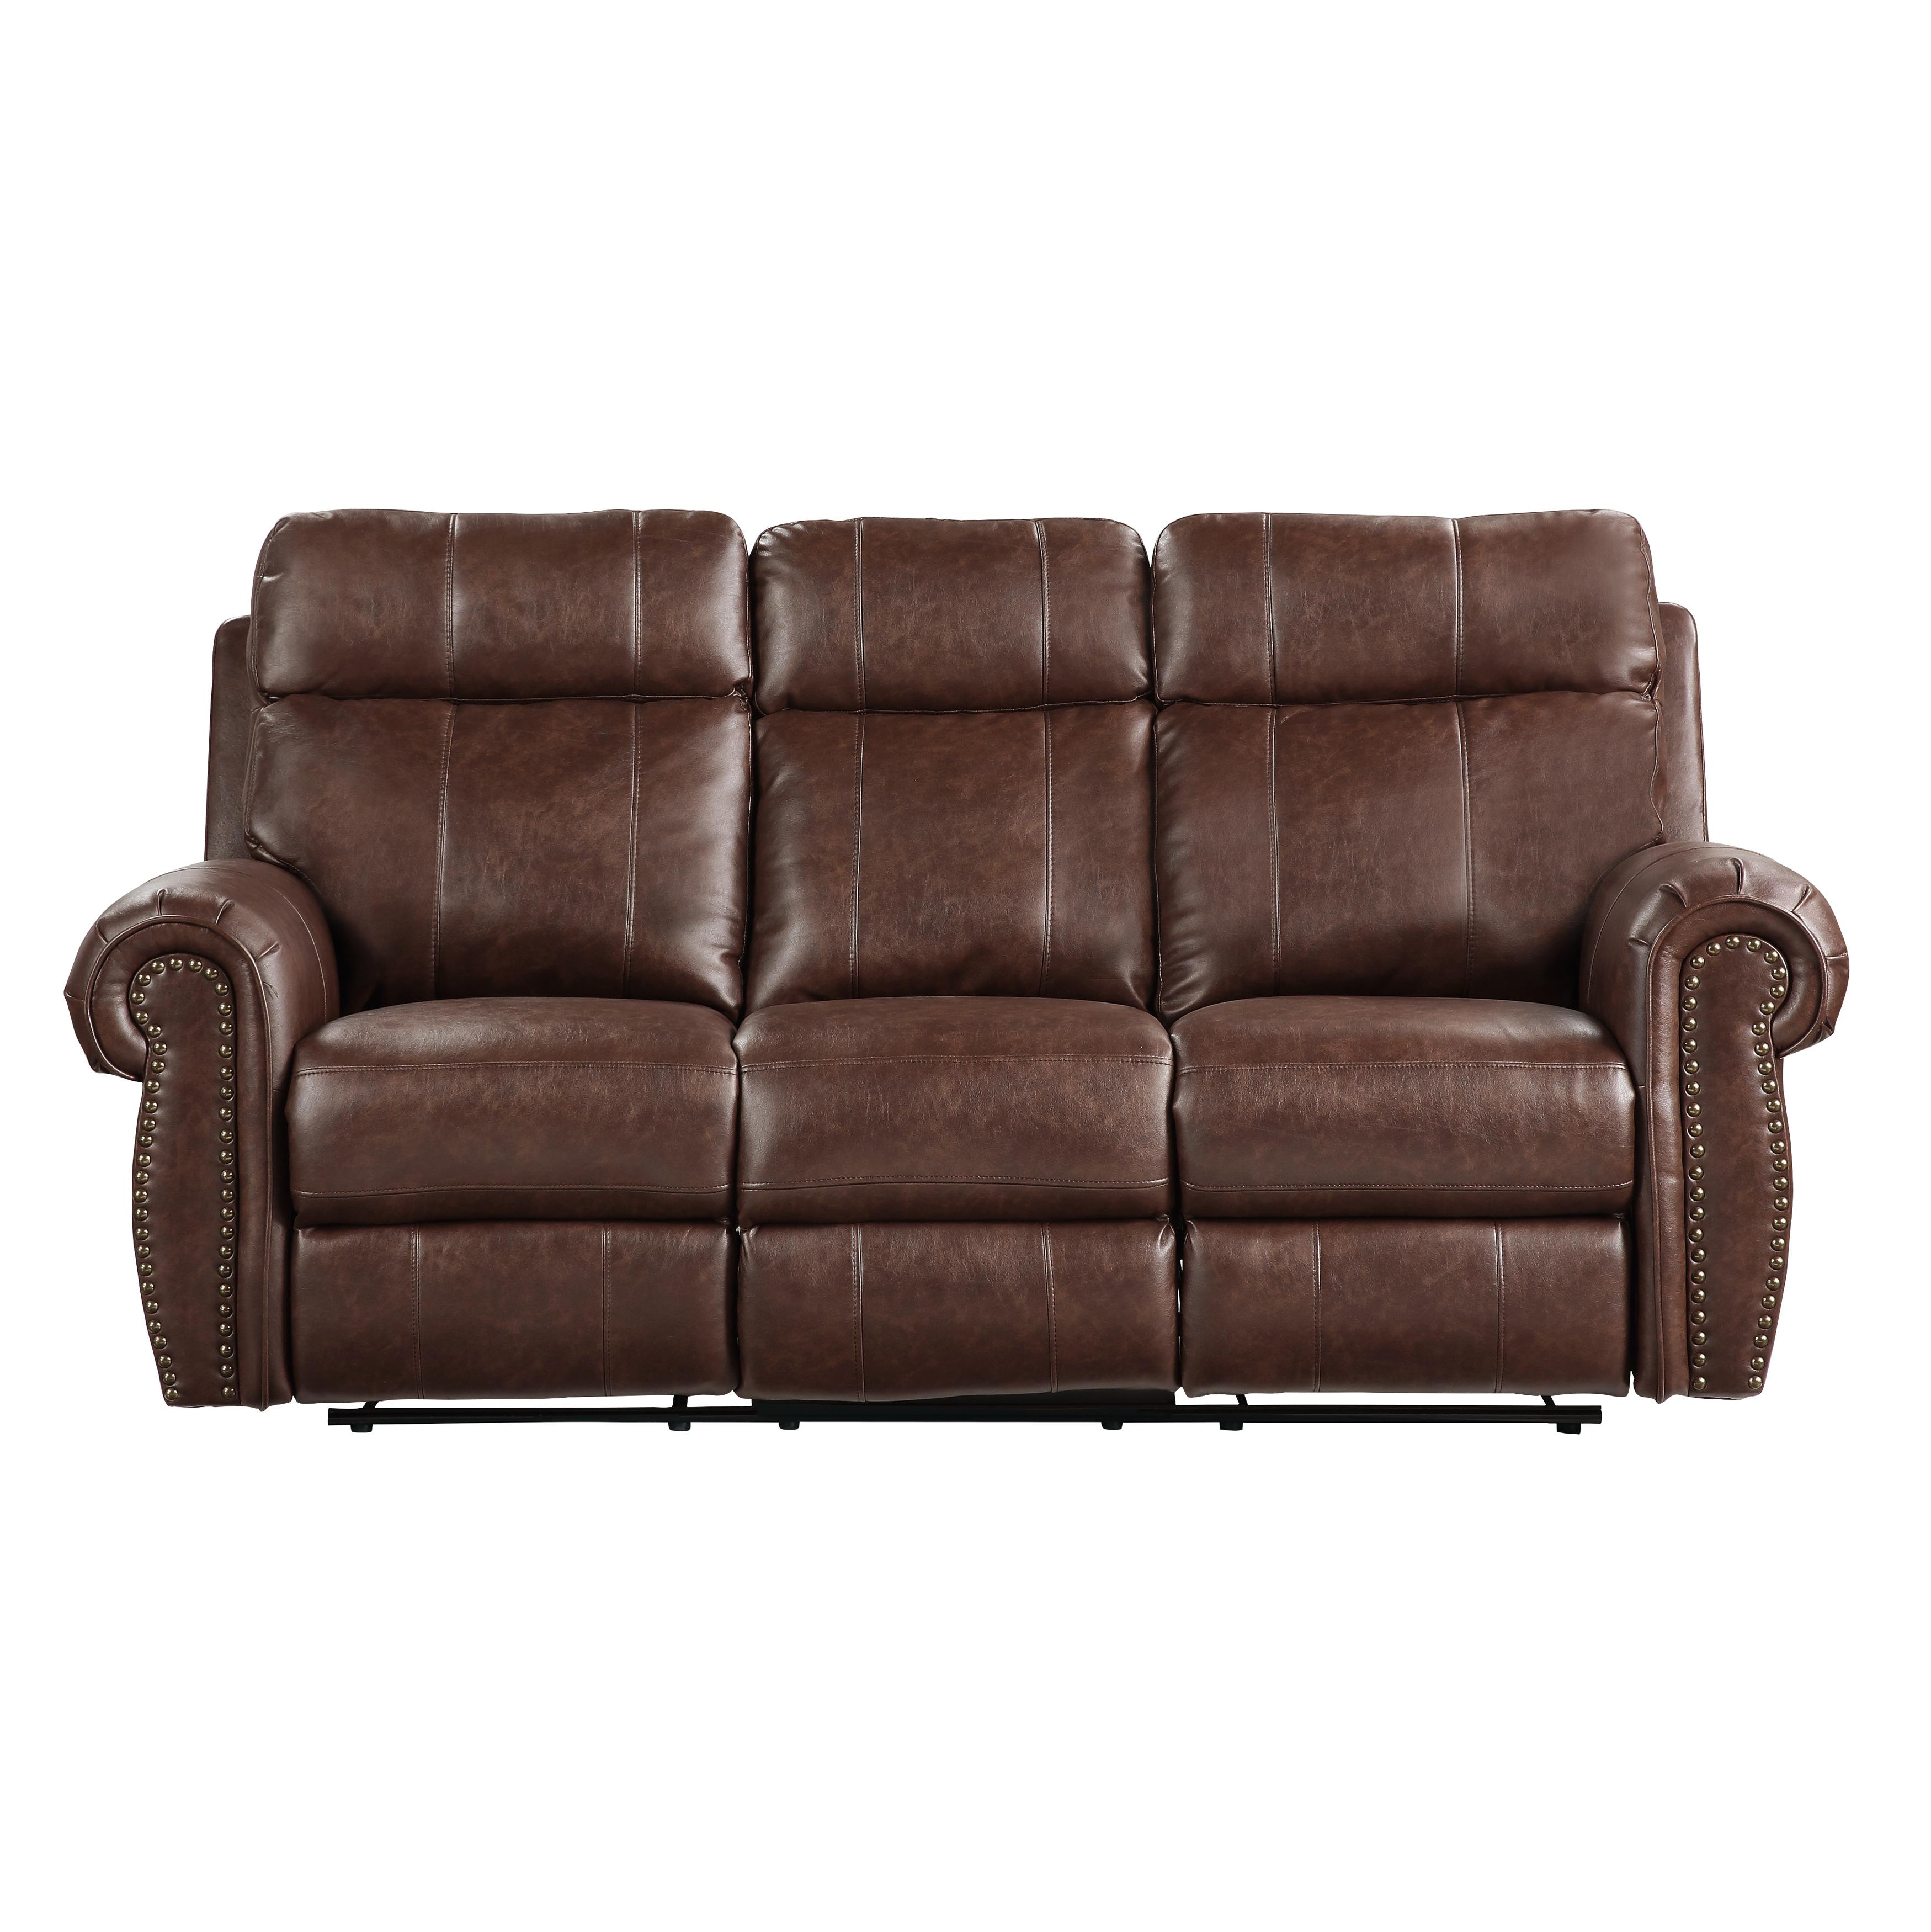 Transitional Power Reclining Sofa 9488BR-3PW Granville 9488BR-3PW in Brown Microfiber